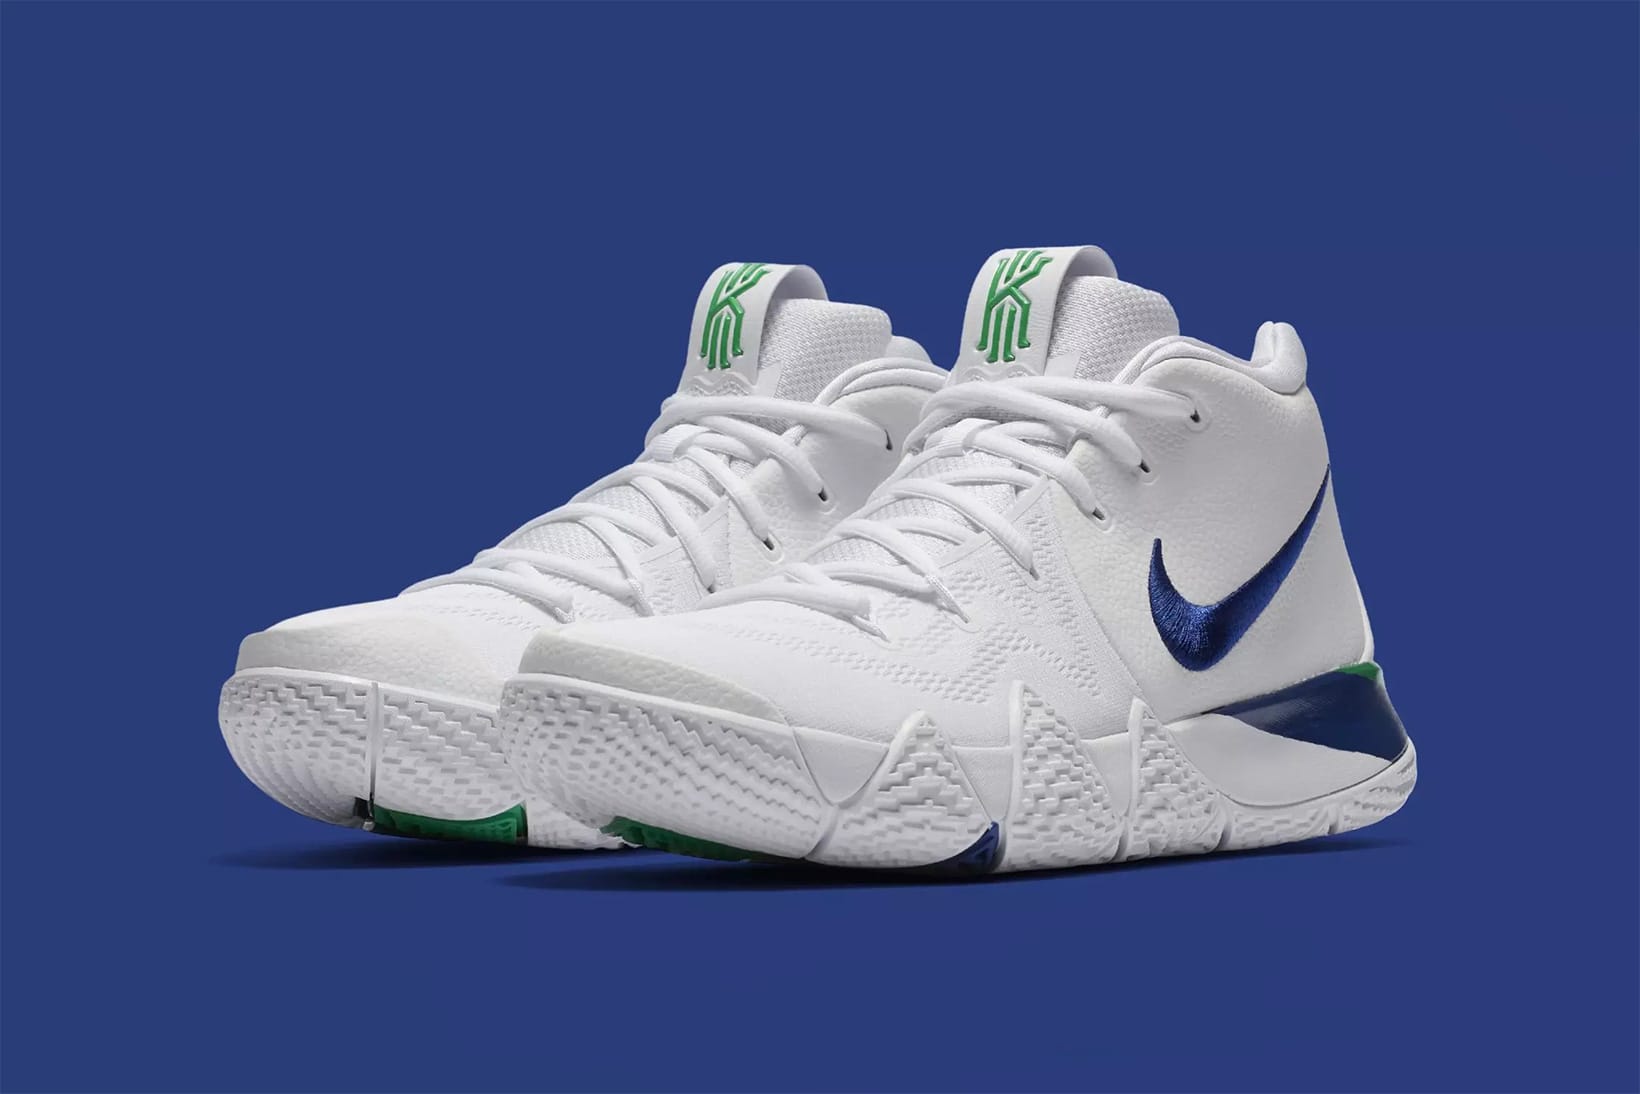 kyrie irving shoes 4 white